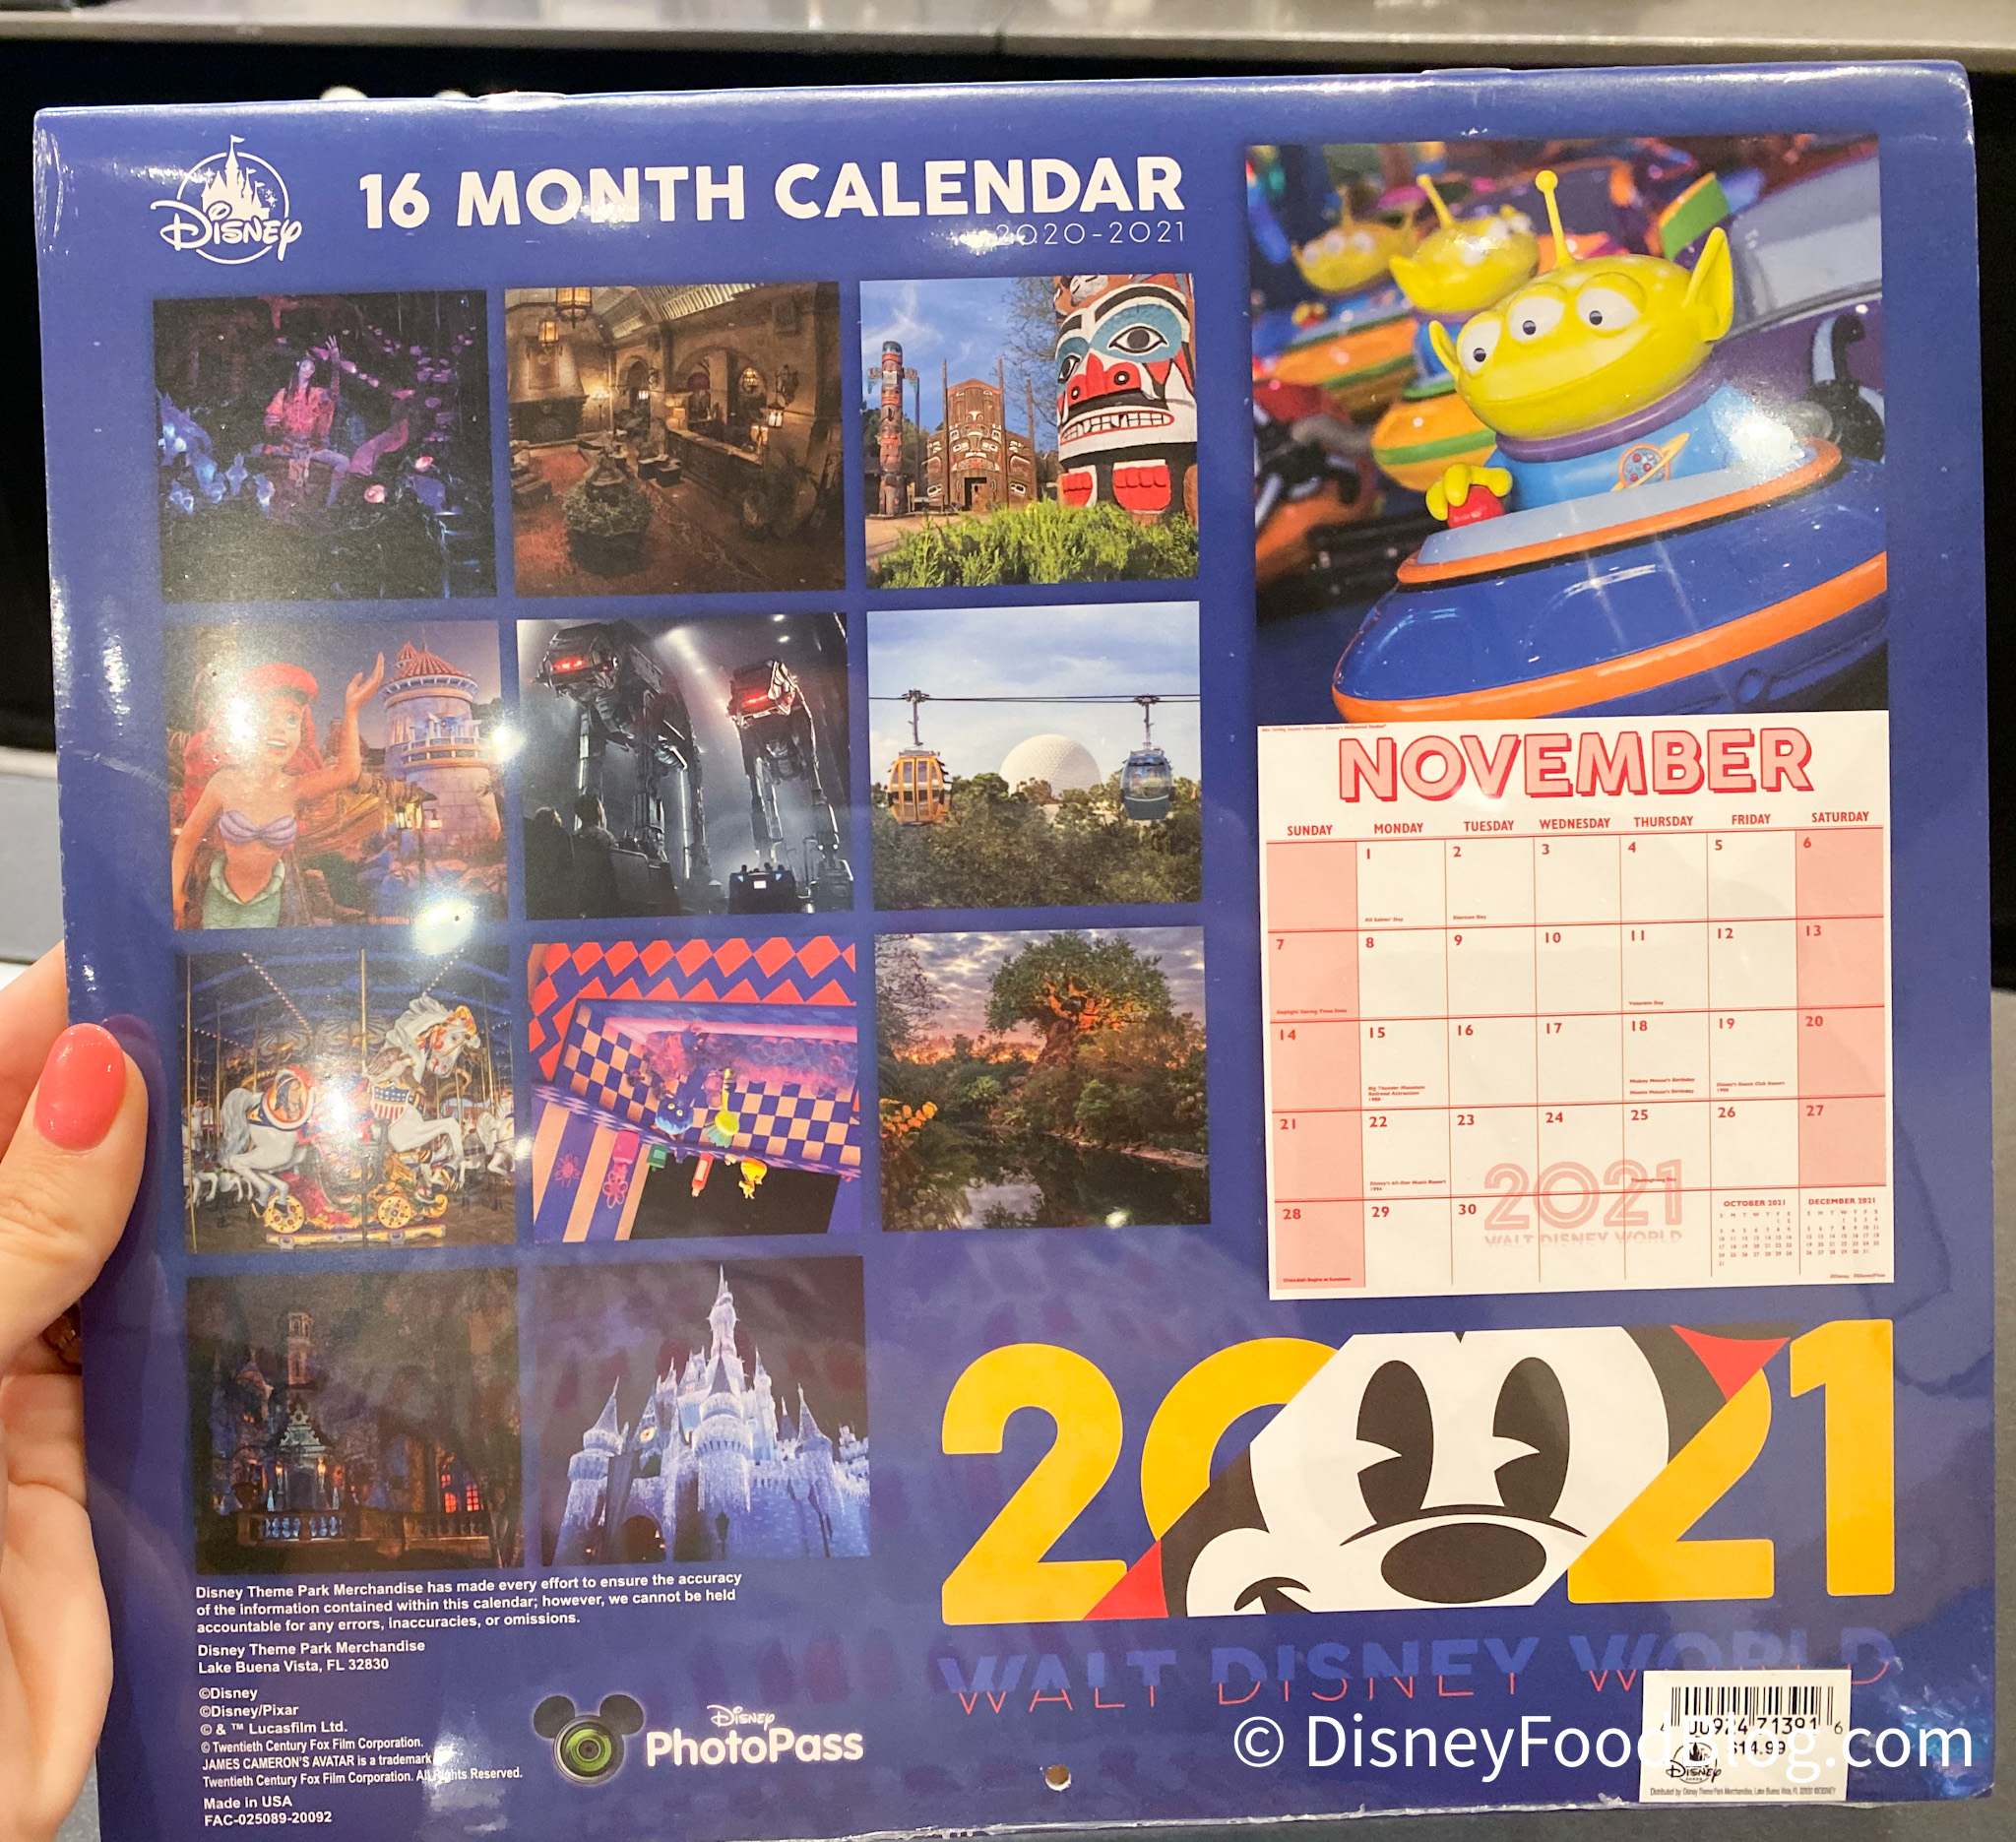 Spotted A New 21 Calendar Is Now Available In Disney World The Disney Food Blog